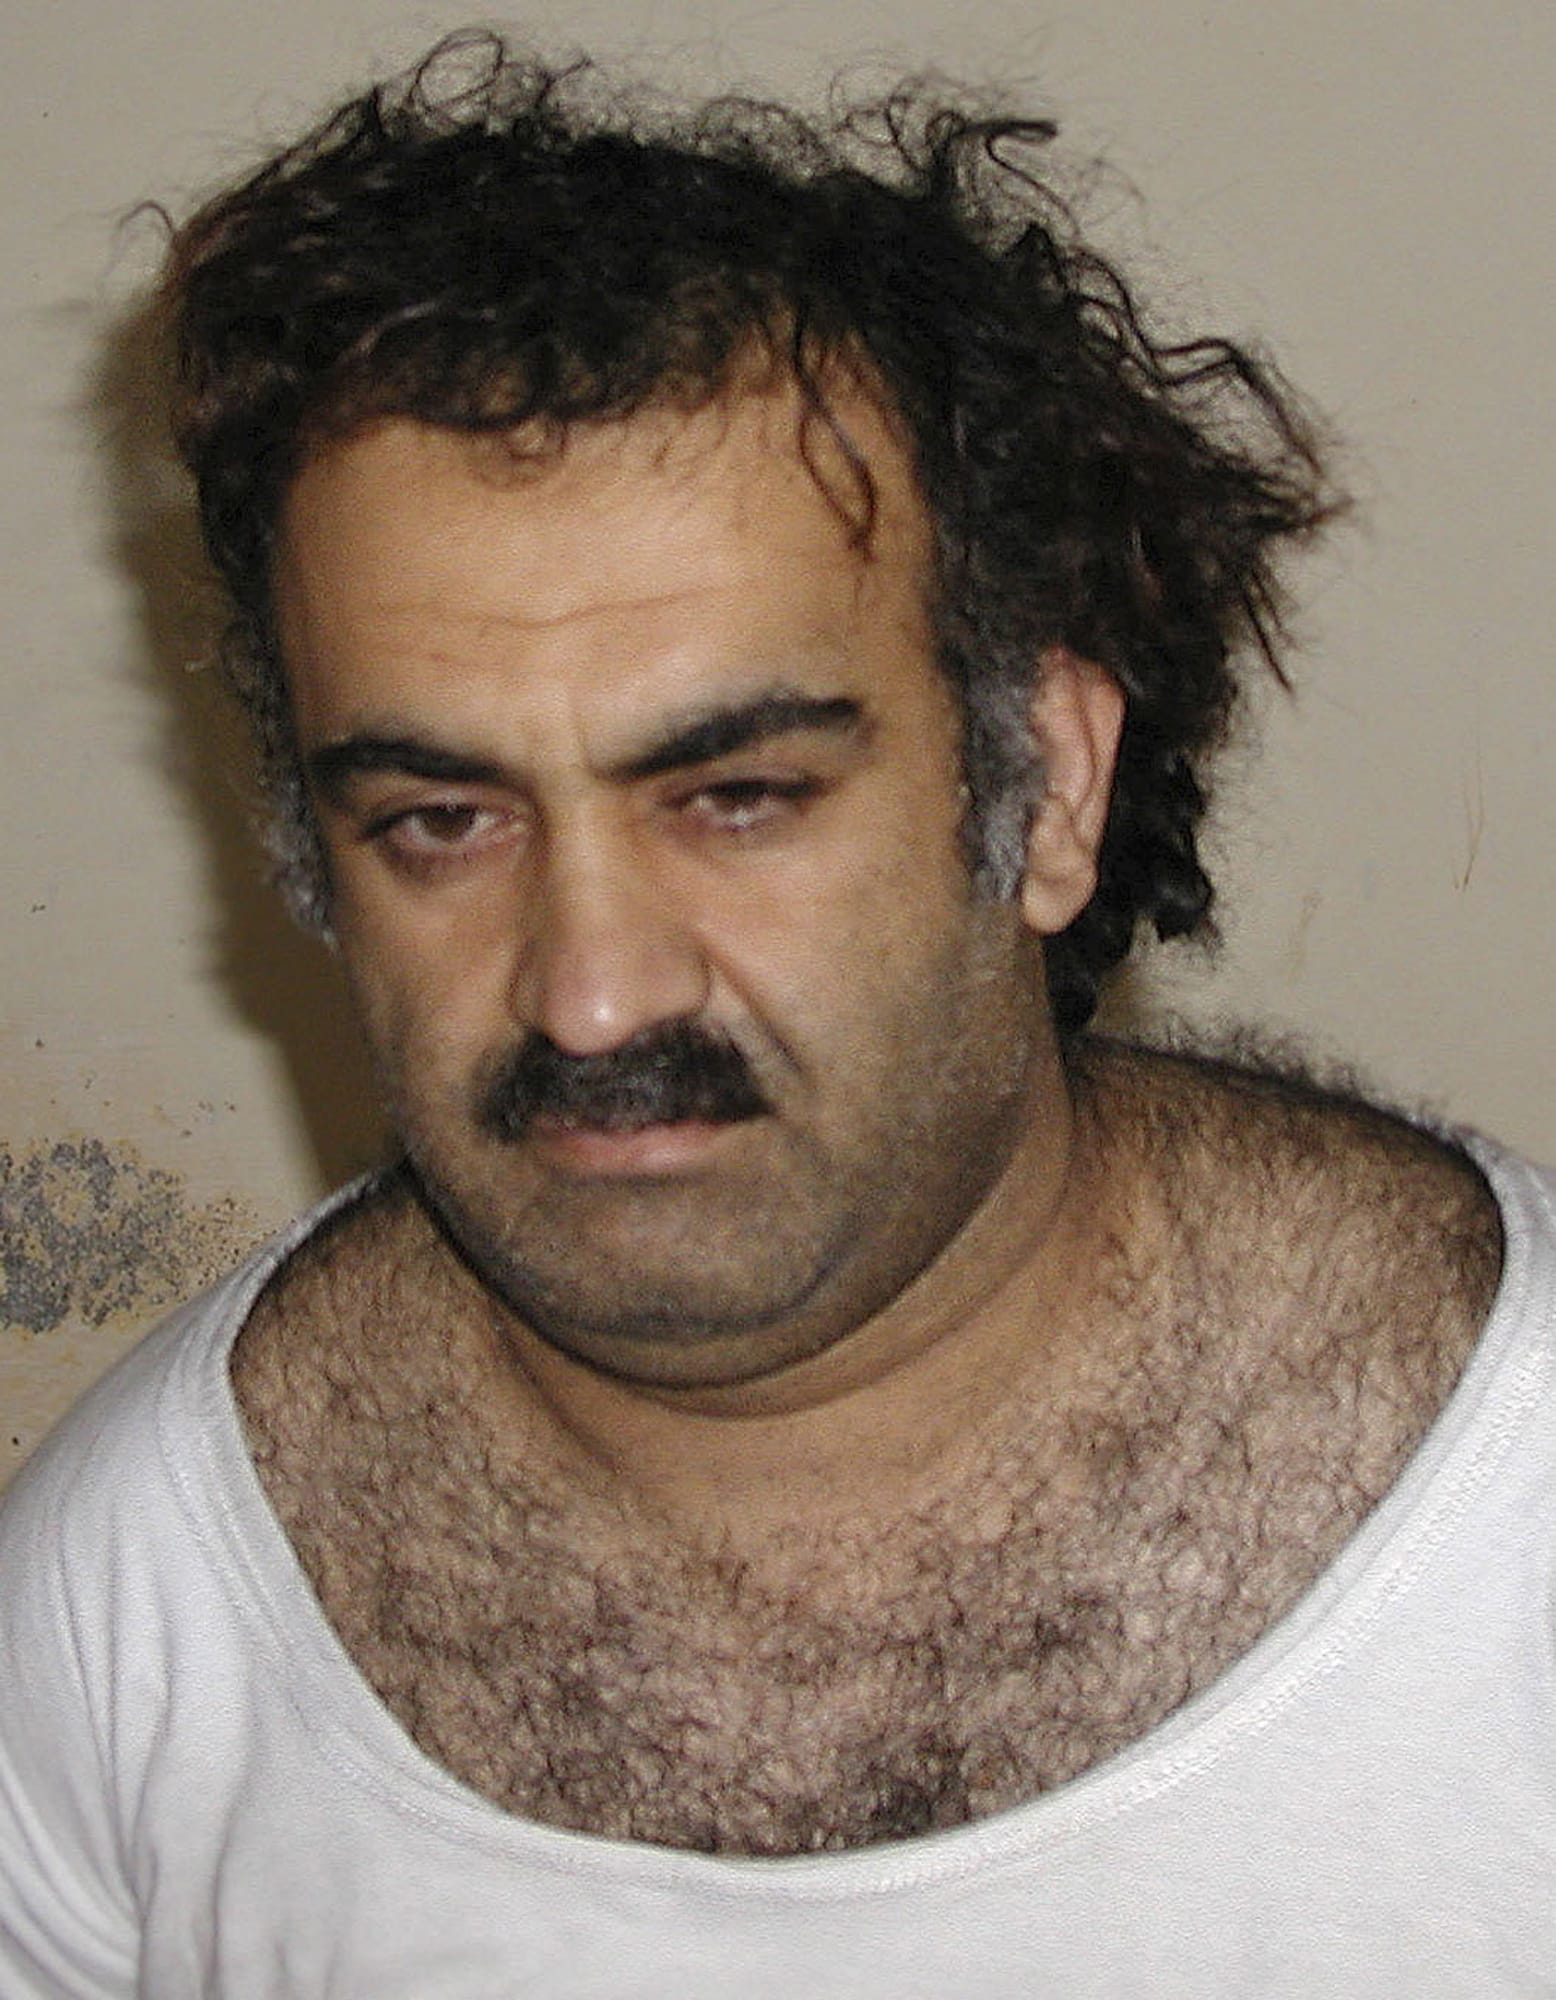 Khalid Sheikh Mohammed in March 2003, shortly after his capture during a raid in Pakistan. When CIA interrogators were torturing 9/11 mastermind Khalid Sheikh Mohammed at a secret prison in Poland in March 2003, a top CIA analyst asked the interrogators to show Mohammed a photograph of an alleged terrorist named Majid Khan. The interrogators slapped Mohammed, denied him sleep, rehydrated him through his rectum, threatened to kill his children and waterboarded him 183 times.